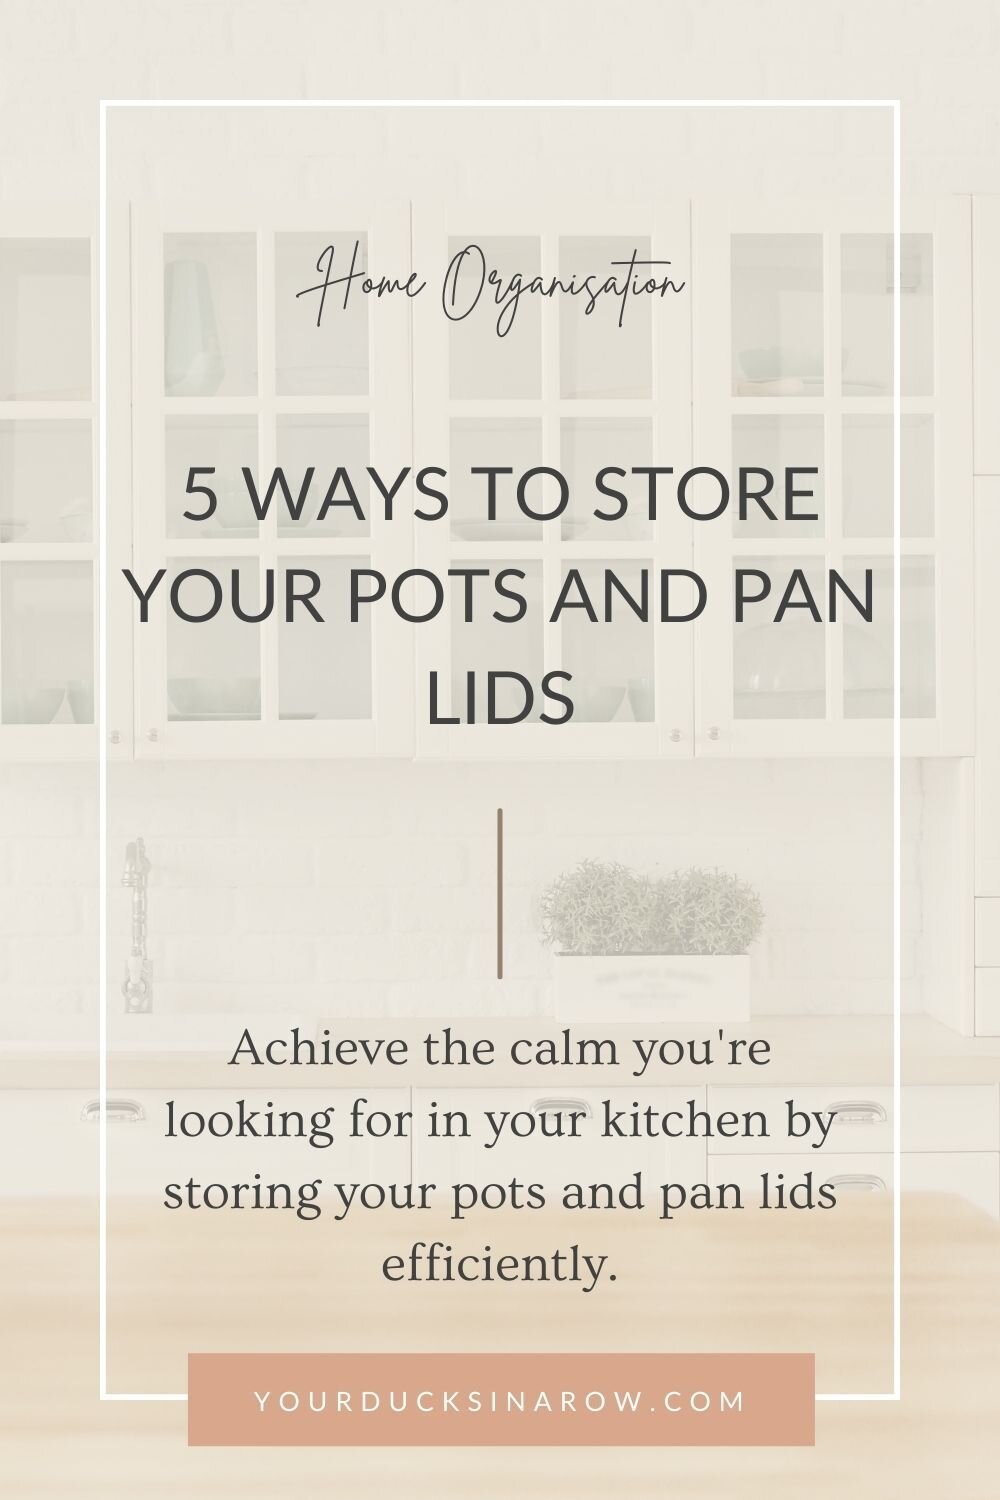 Ducks in a Row Home Organisation Decluttering - 5 Ways to Store Your Pots and Pan Lids